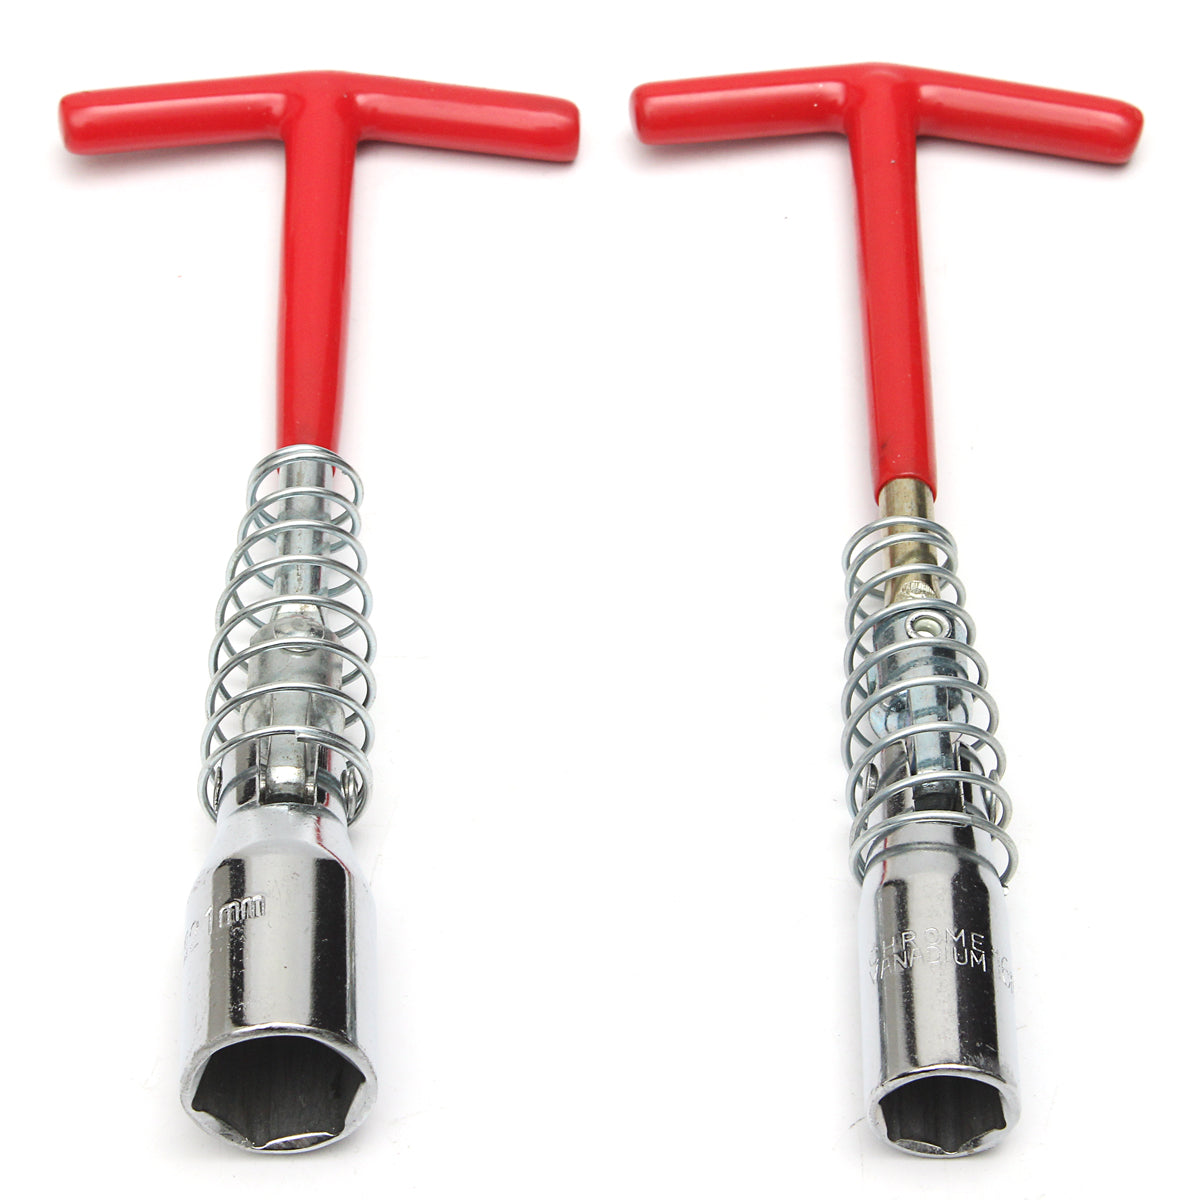 Tomato 16mm&21mm T-Bar Universal Spark Plug Spanner Socket Wrench T Handle Removal Tool